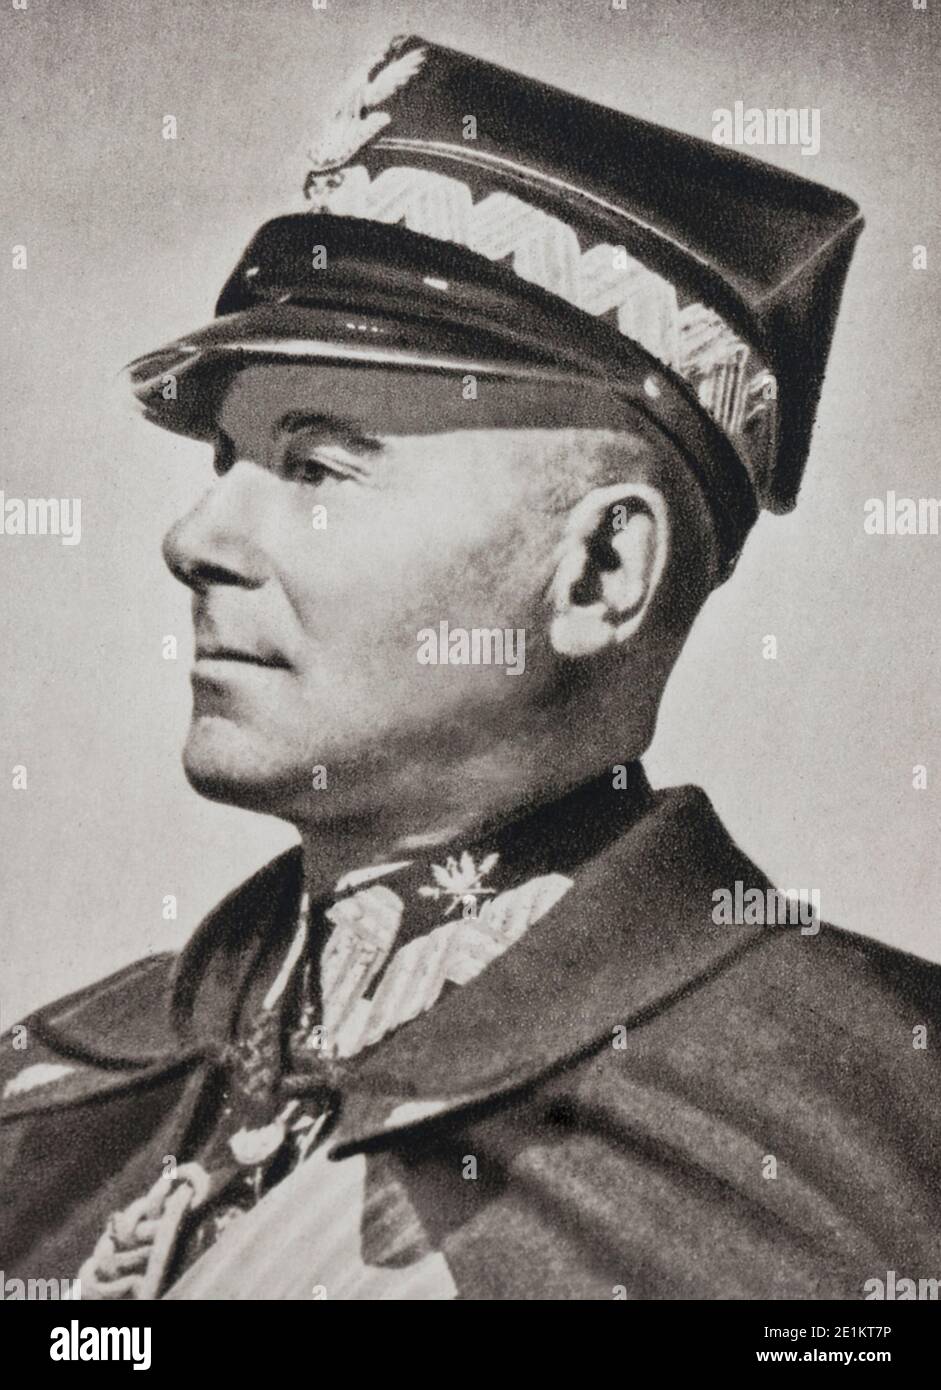 Portrait of Marshal Edward Rydz-Smigły (1886 – 1941), was a Polish politician, statesman, Marshal of Poland and Commander-in-Chief of Poland's armed f Stock Photo